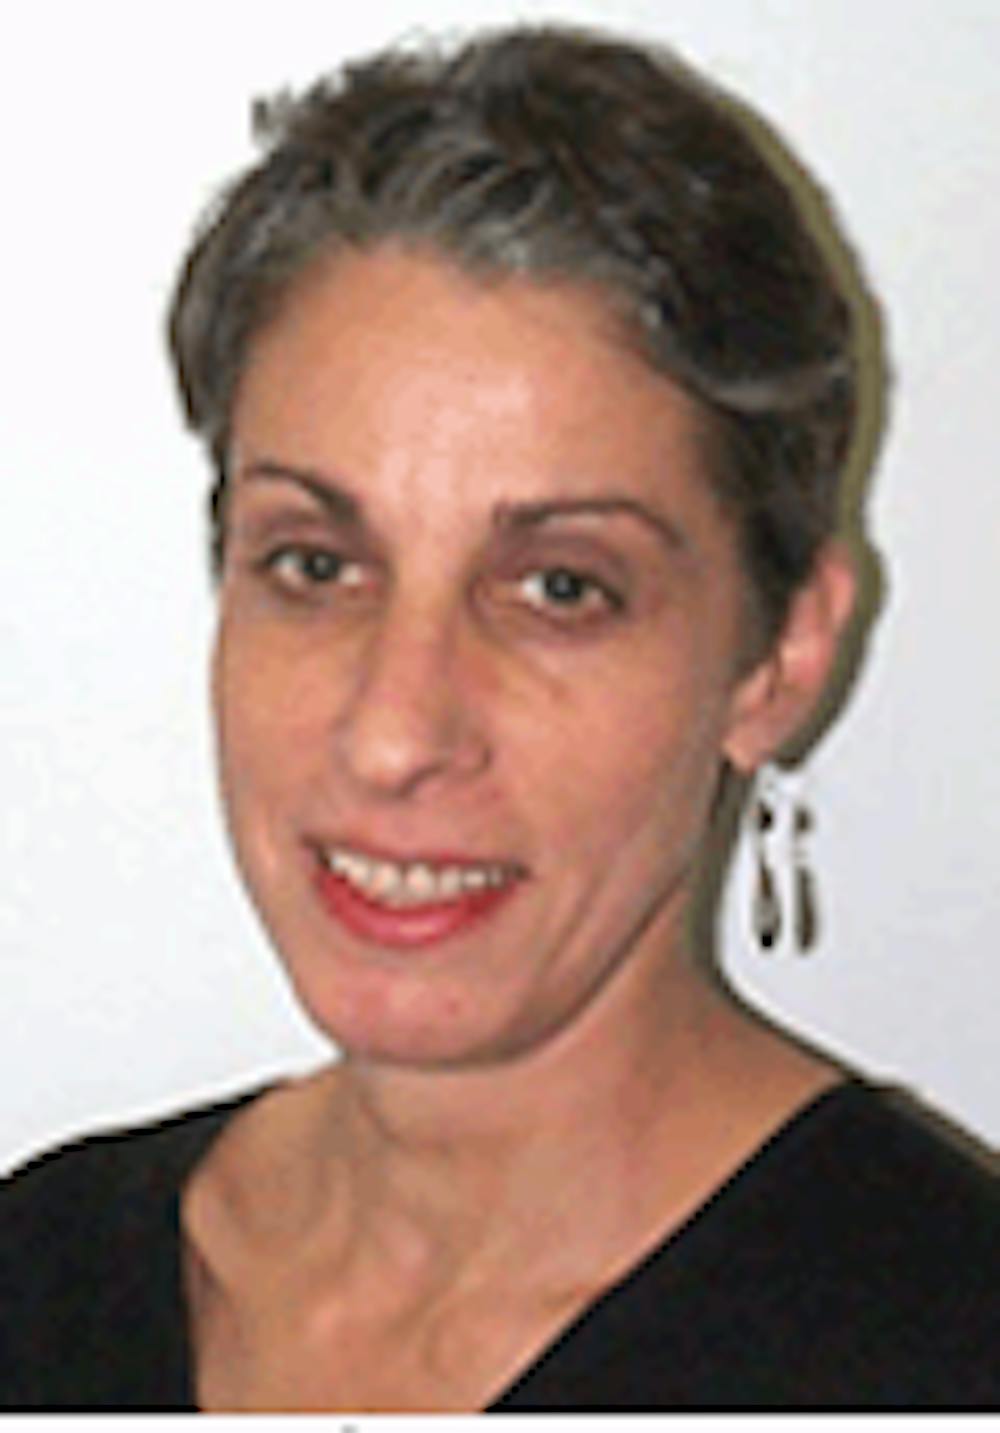 Former Executive Director of Student Health Services Evelyn Wiener